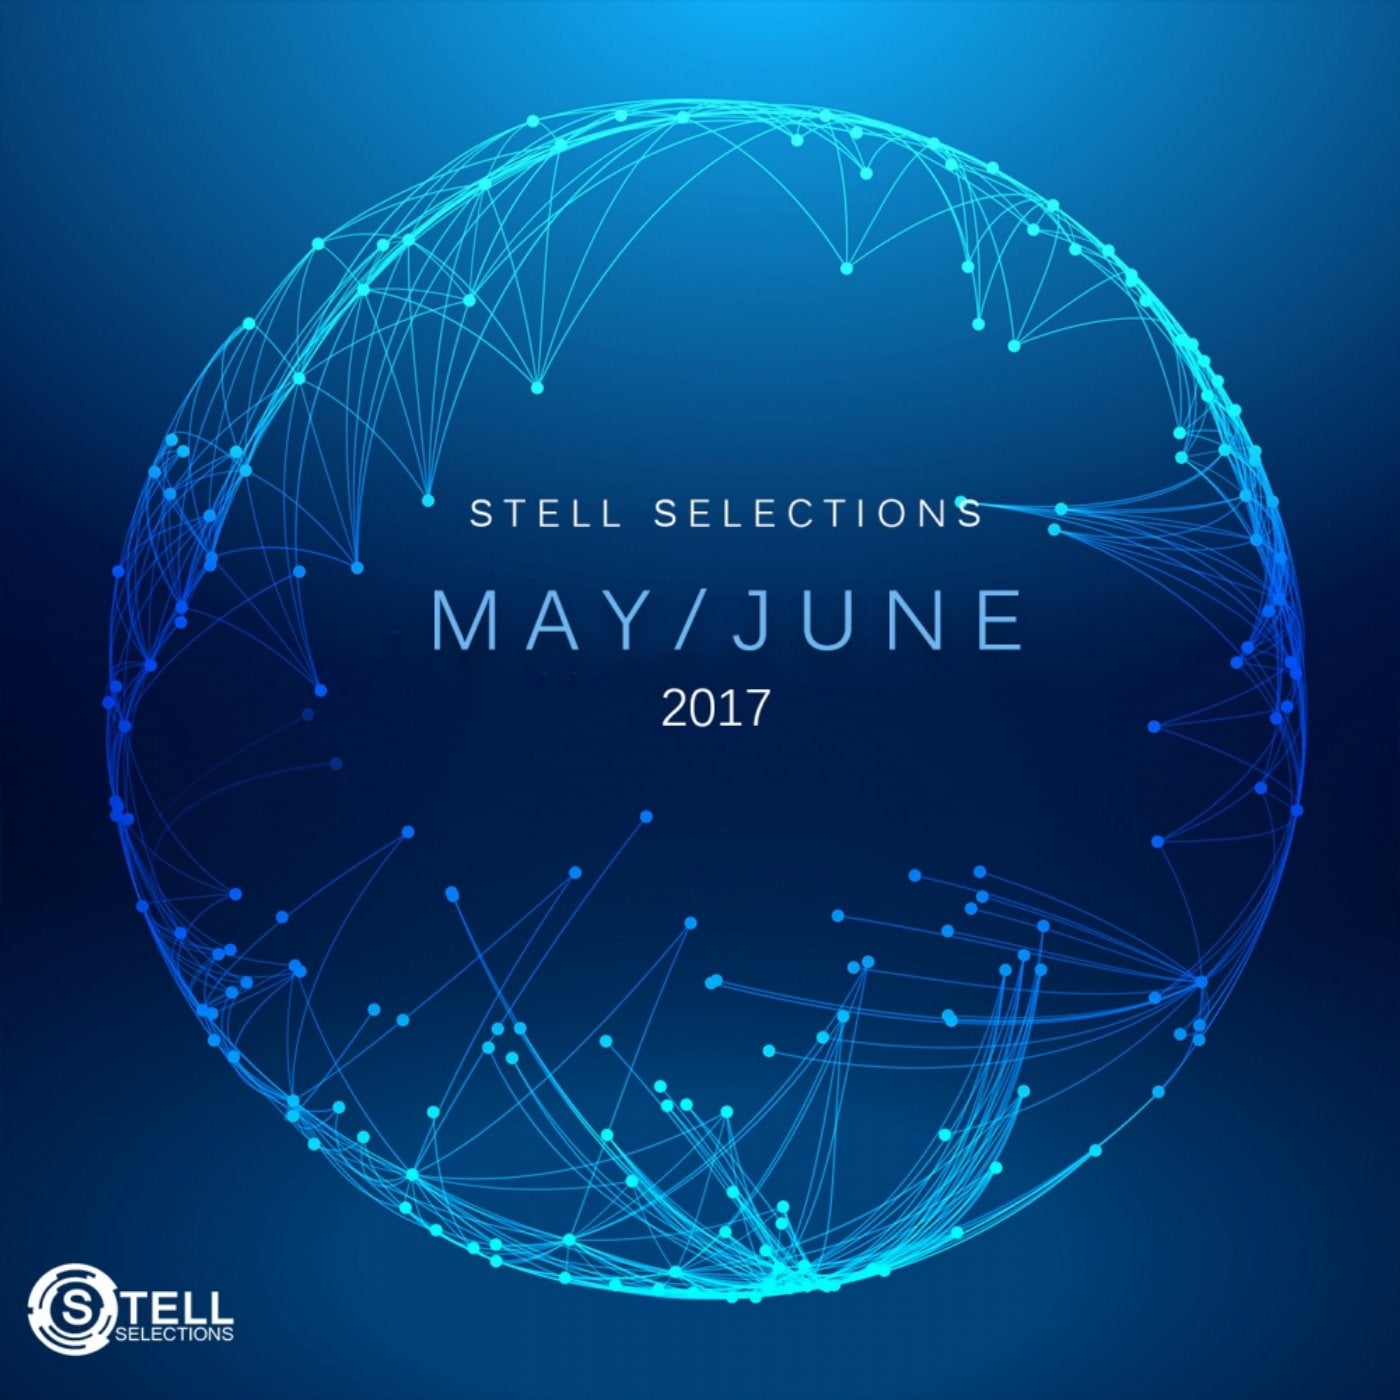 Stell Selections May / June 2017